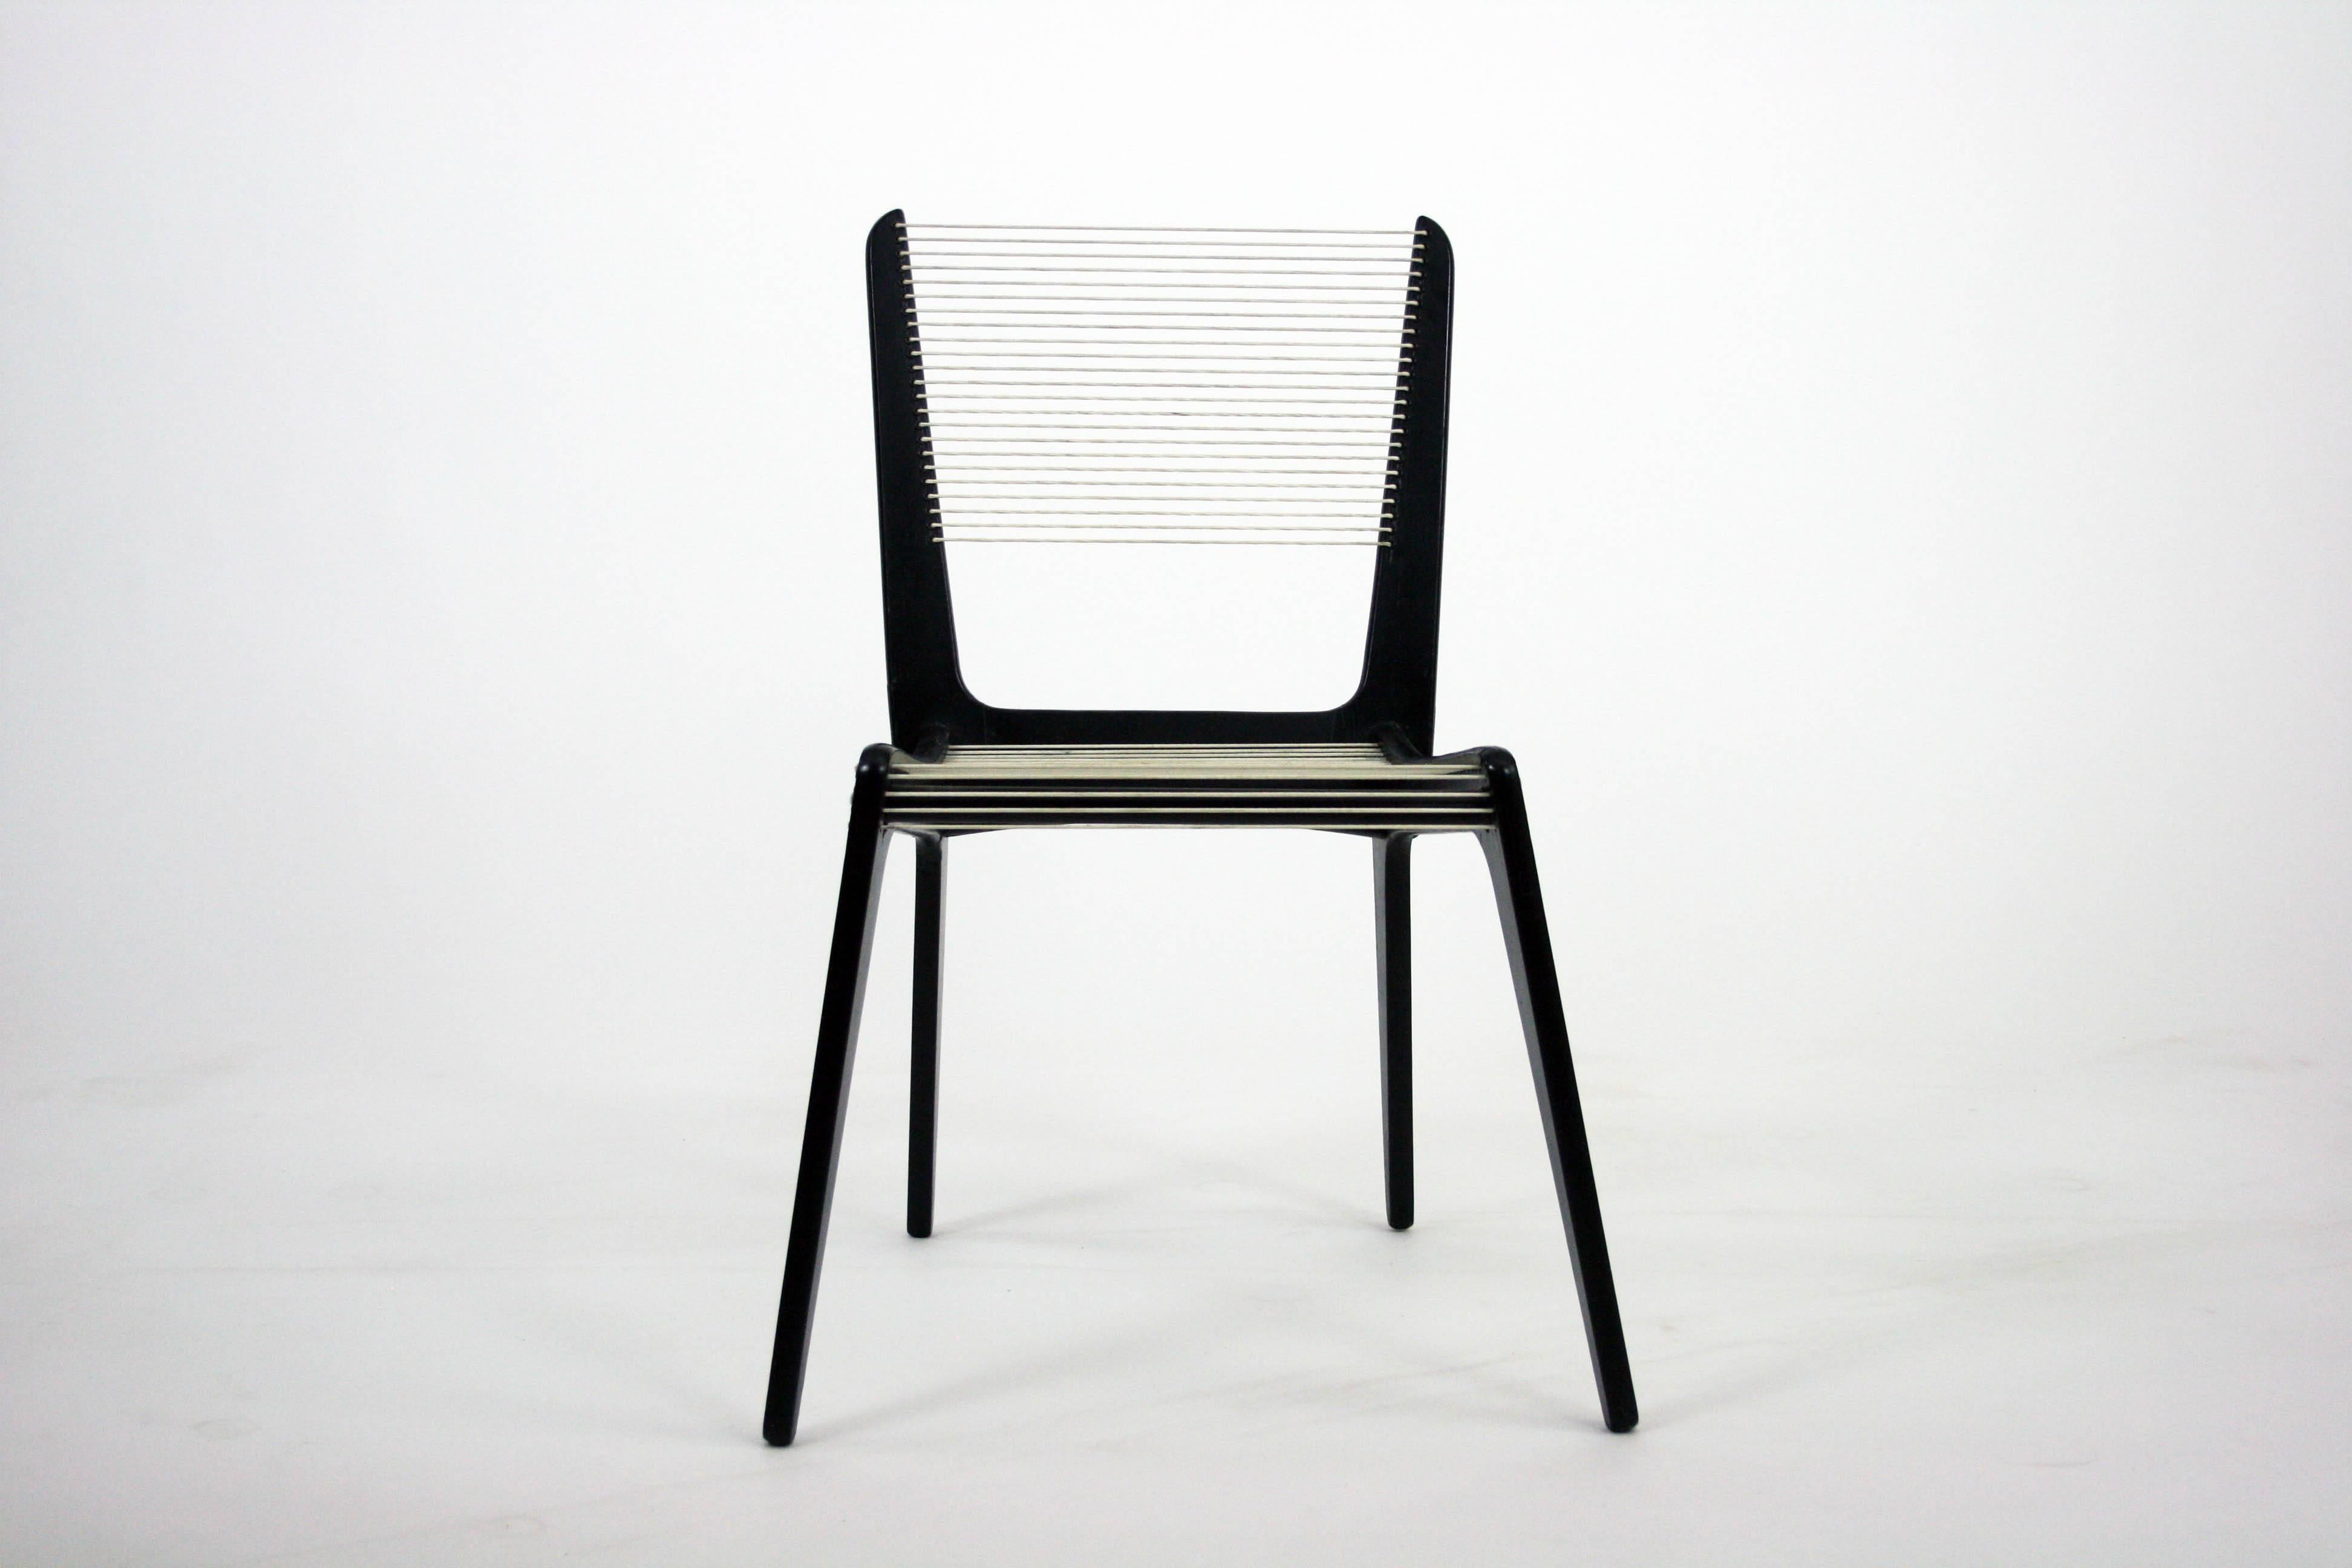 This spare and stylish chair was designed by Jacque Guillon in Montreal, Canada. Designed in 1953, the chair was first introduced during the 1954 Milan Triennale. The lines are great and it is surprisingly comfortable. 